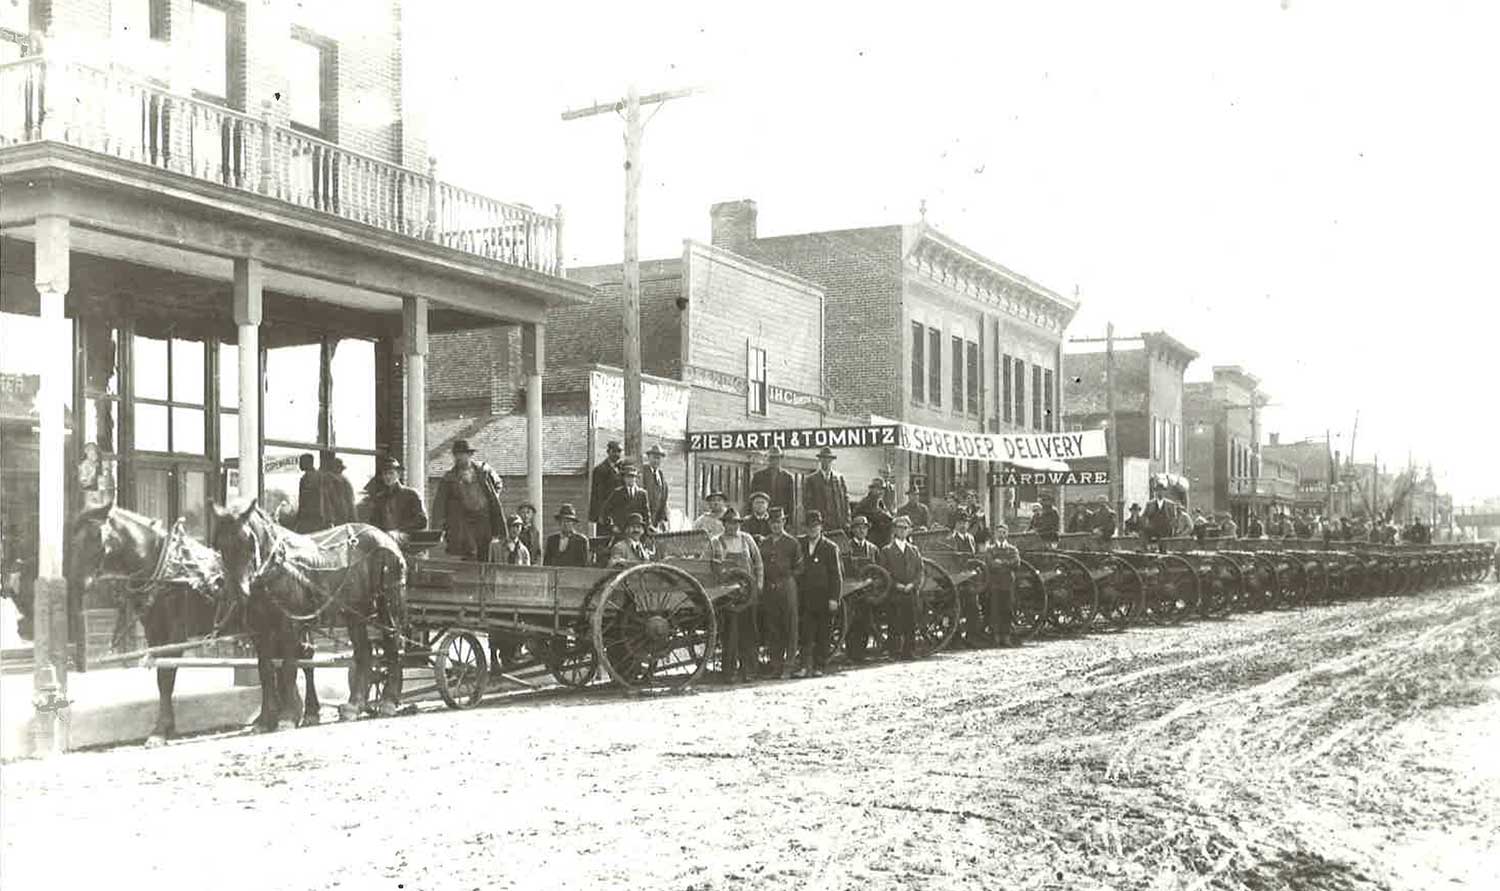 3. Manure Spreaders on River Street